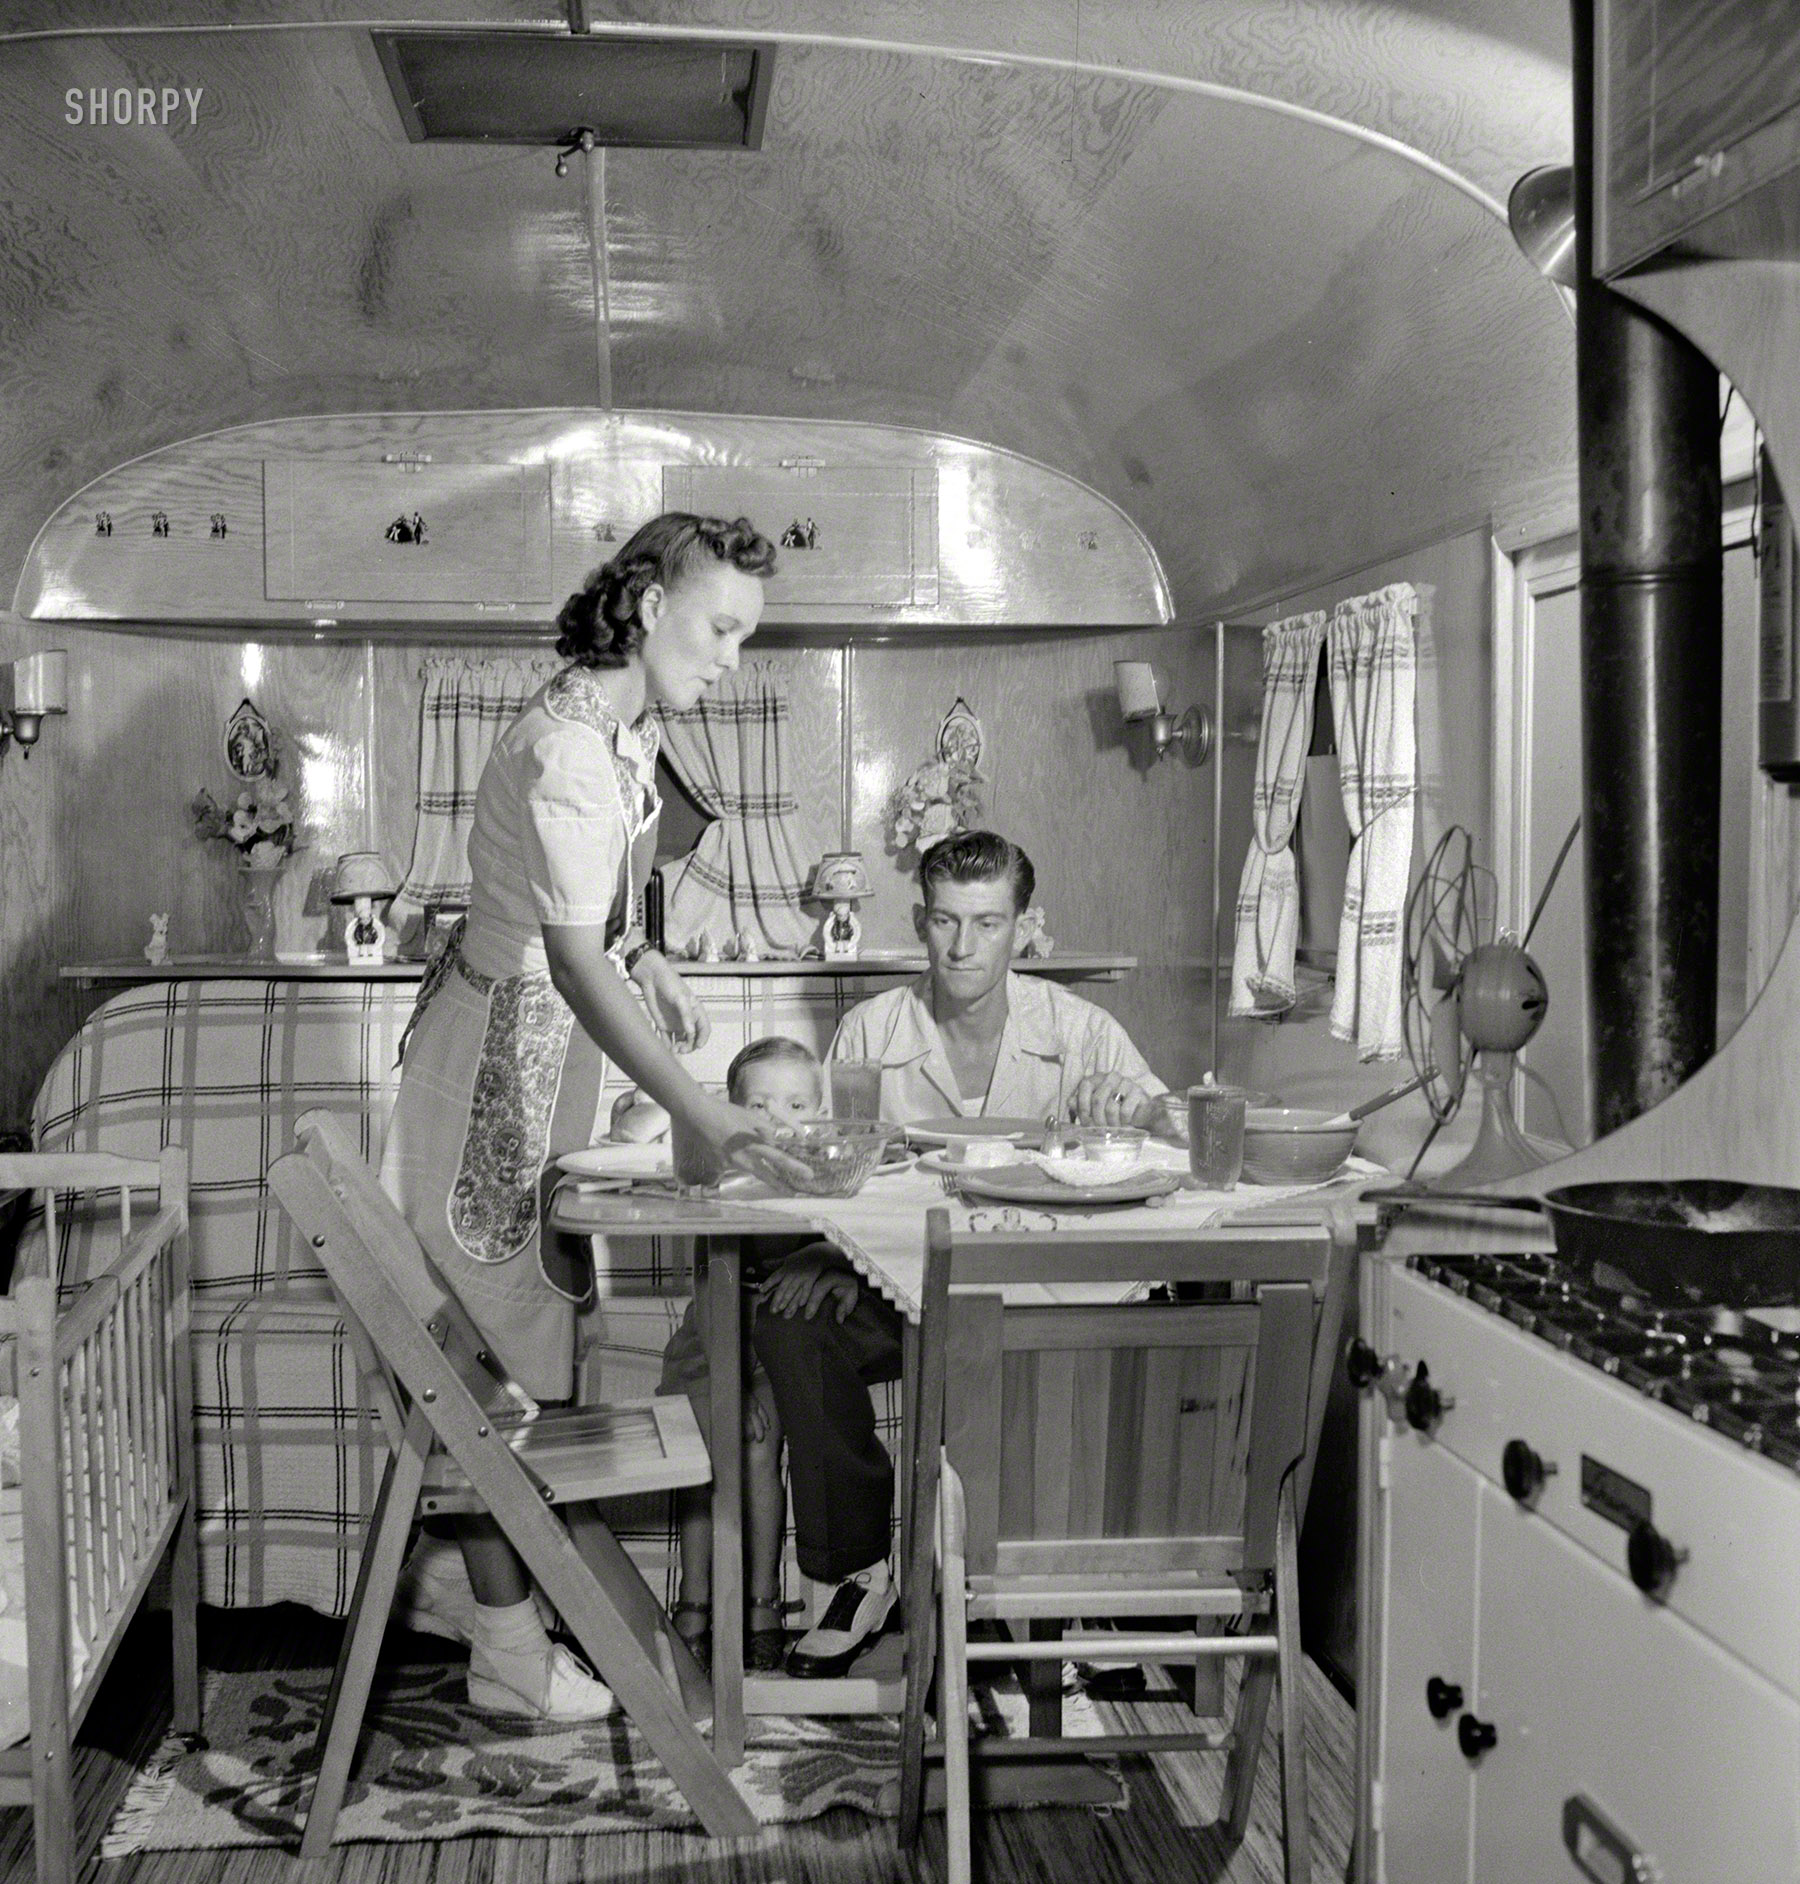 August 1943. "Middle River, Maryland. A Farm Security Administration housing project for Glenn L. Martin aircraft workers. A worker's family in their trailer home." Photo by John Collier for the Office of War Information. View full size.